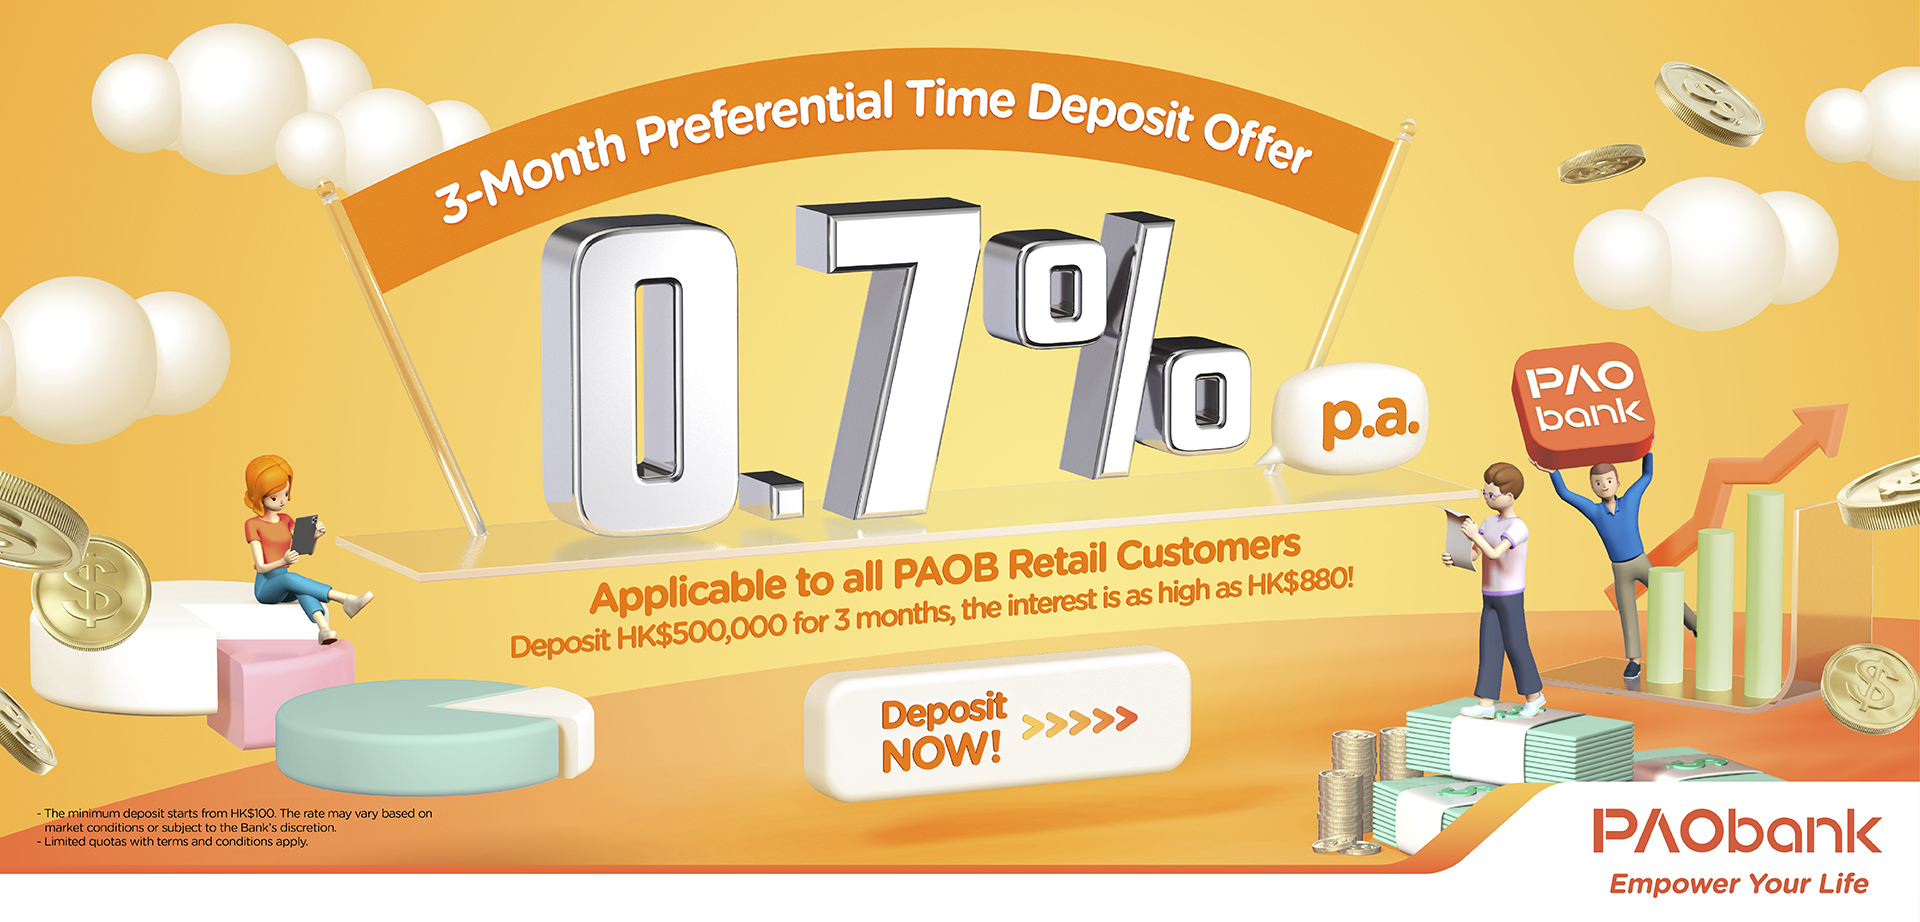 PAOB - PAOB 3-Month Preferential Time Deposit Offer